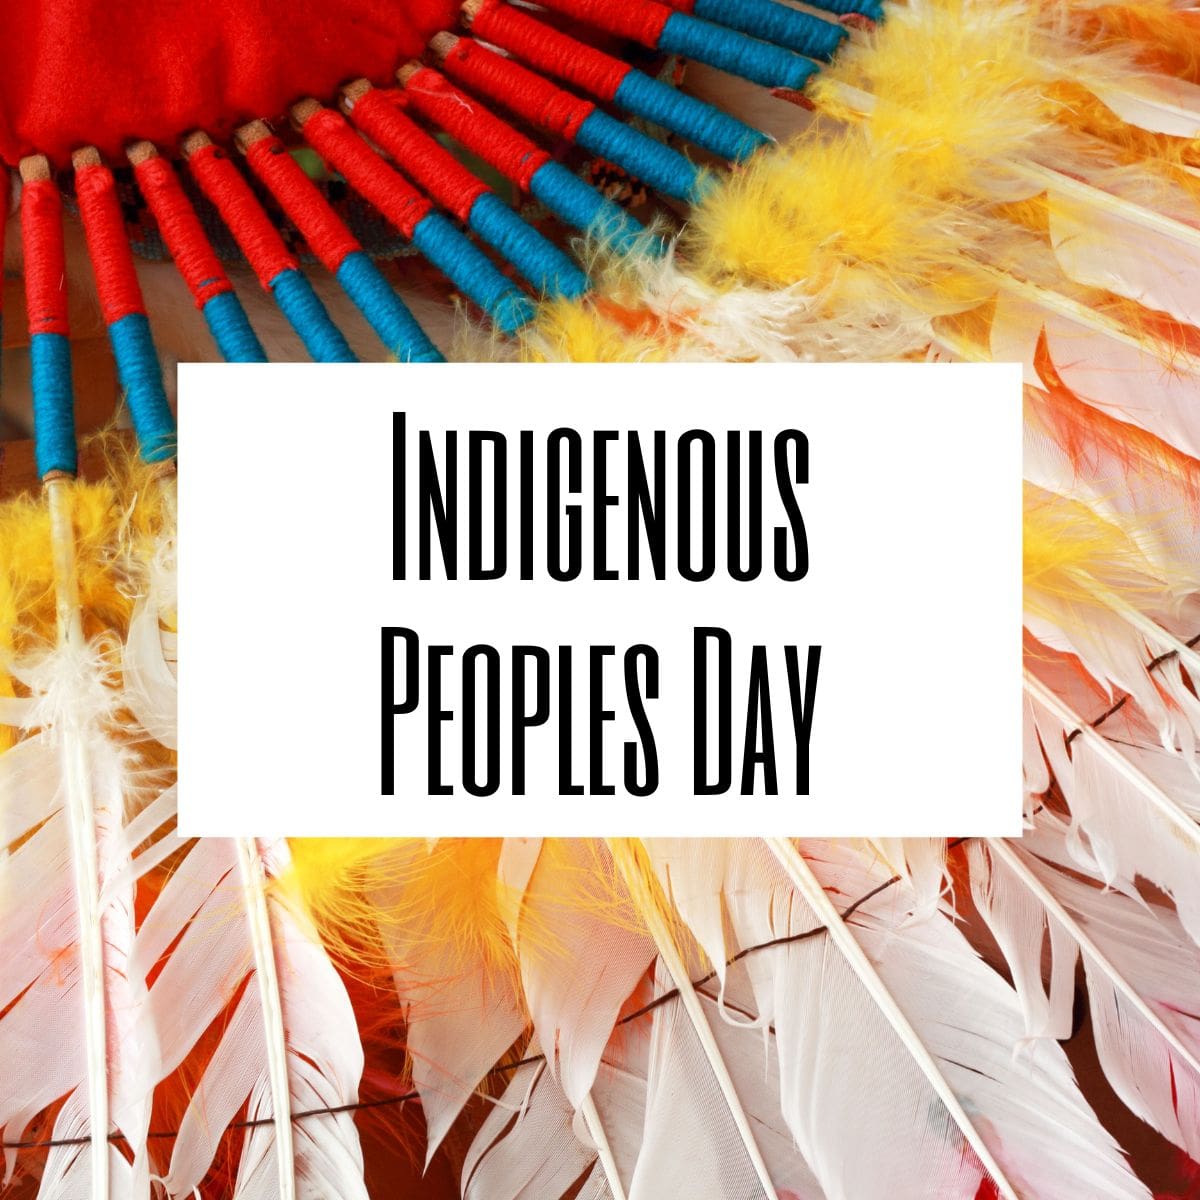 About Indigenous Peoples Day